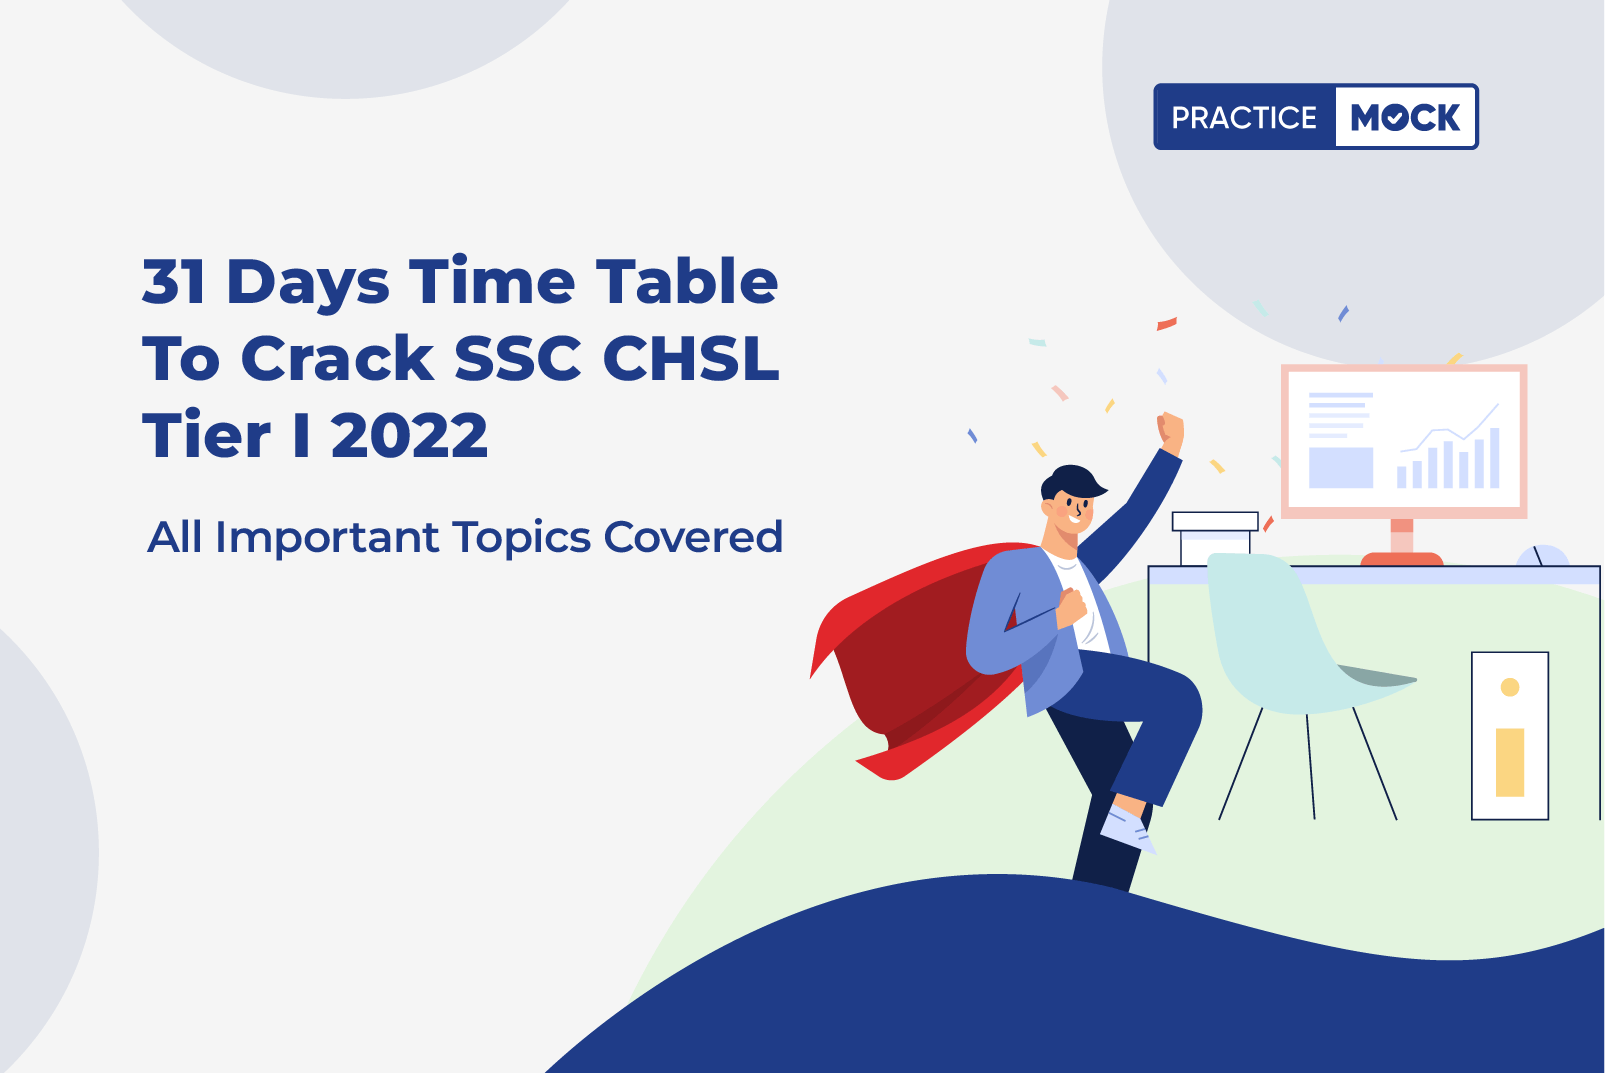 SSC CHSL 31 Days Time Table